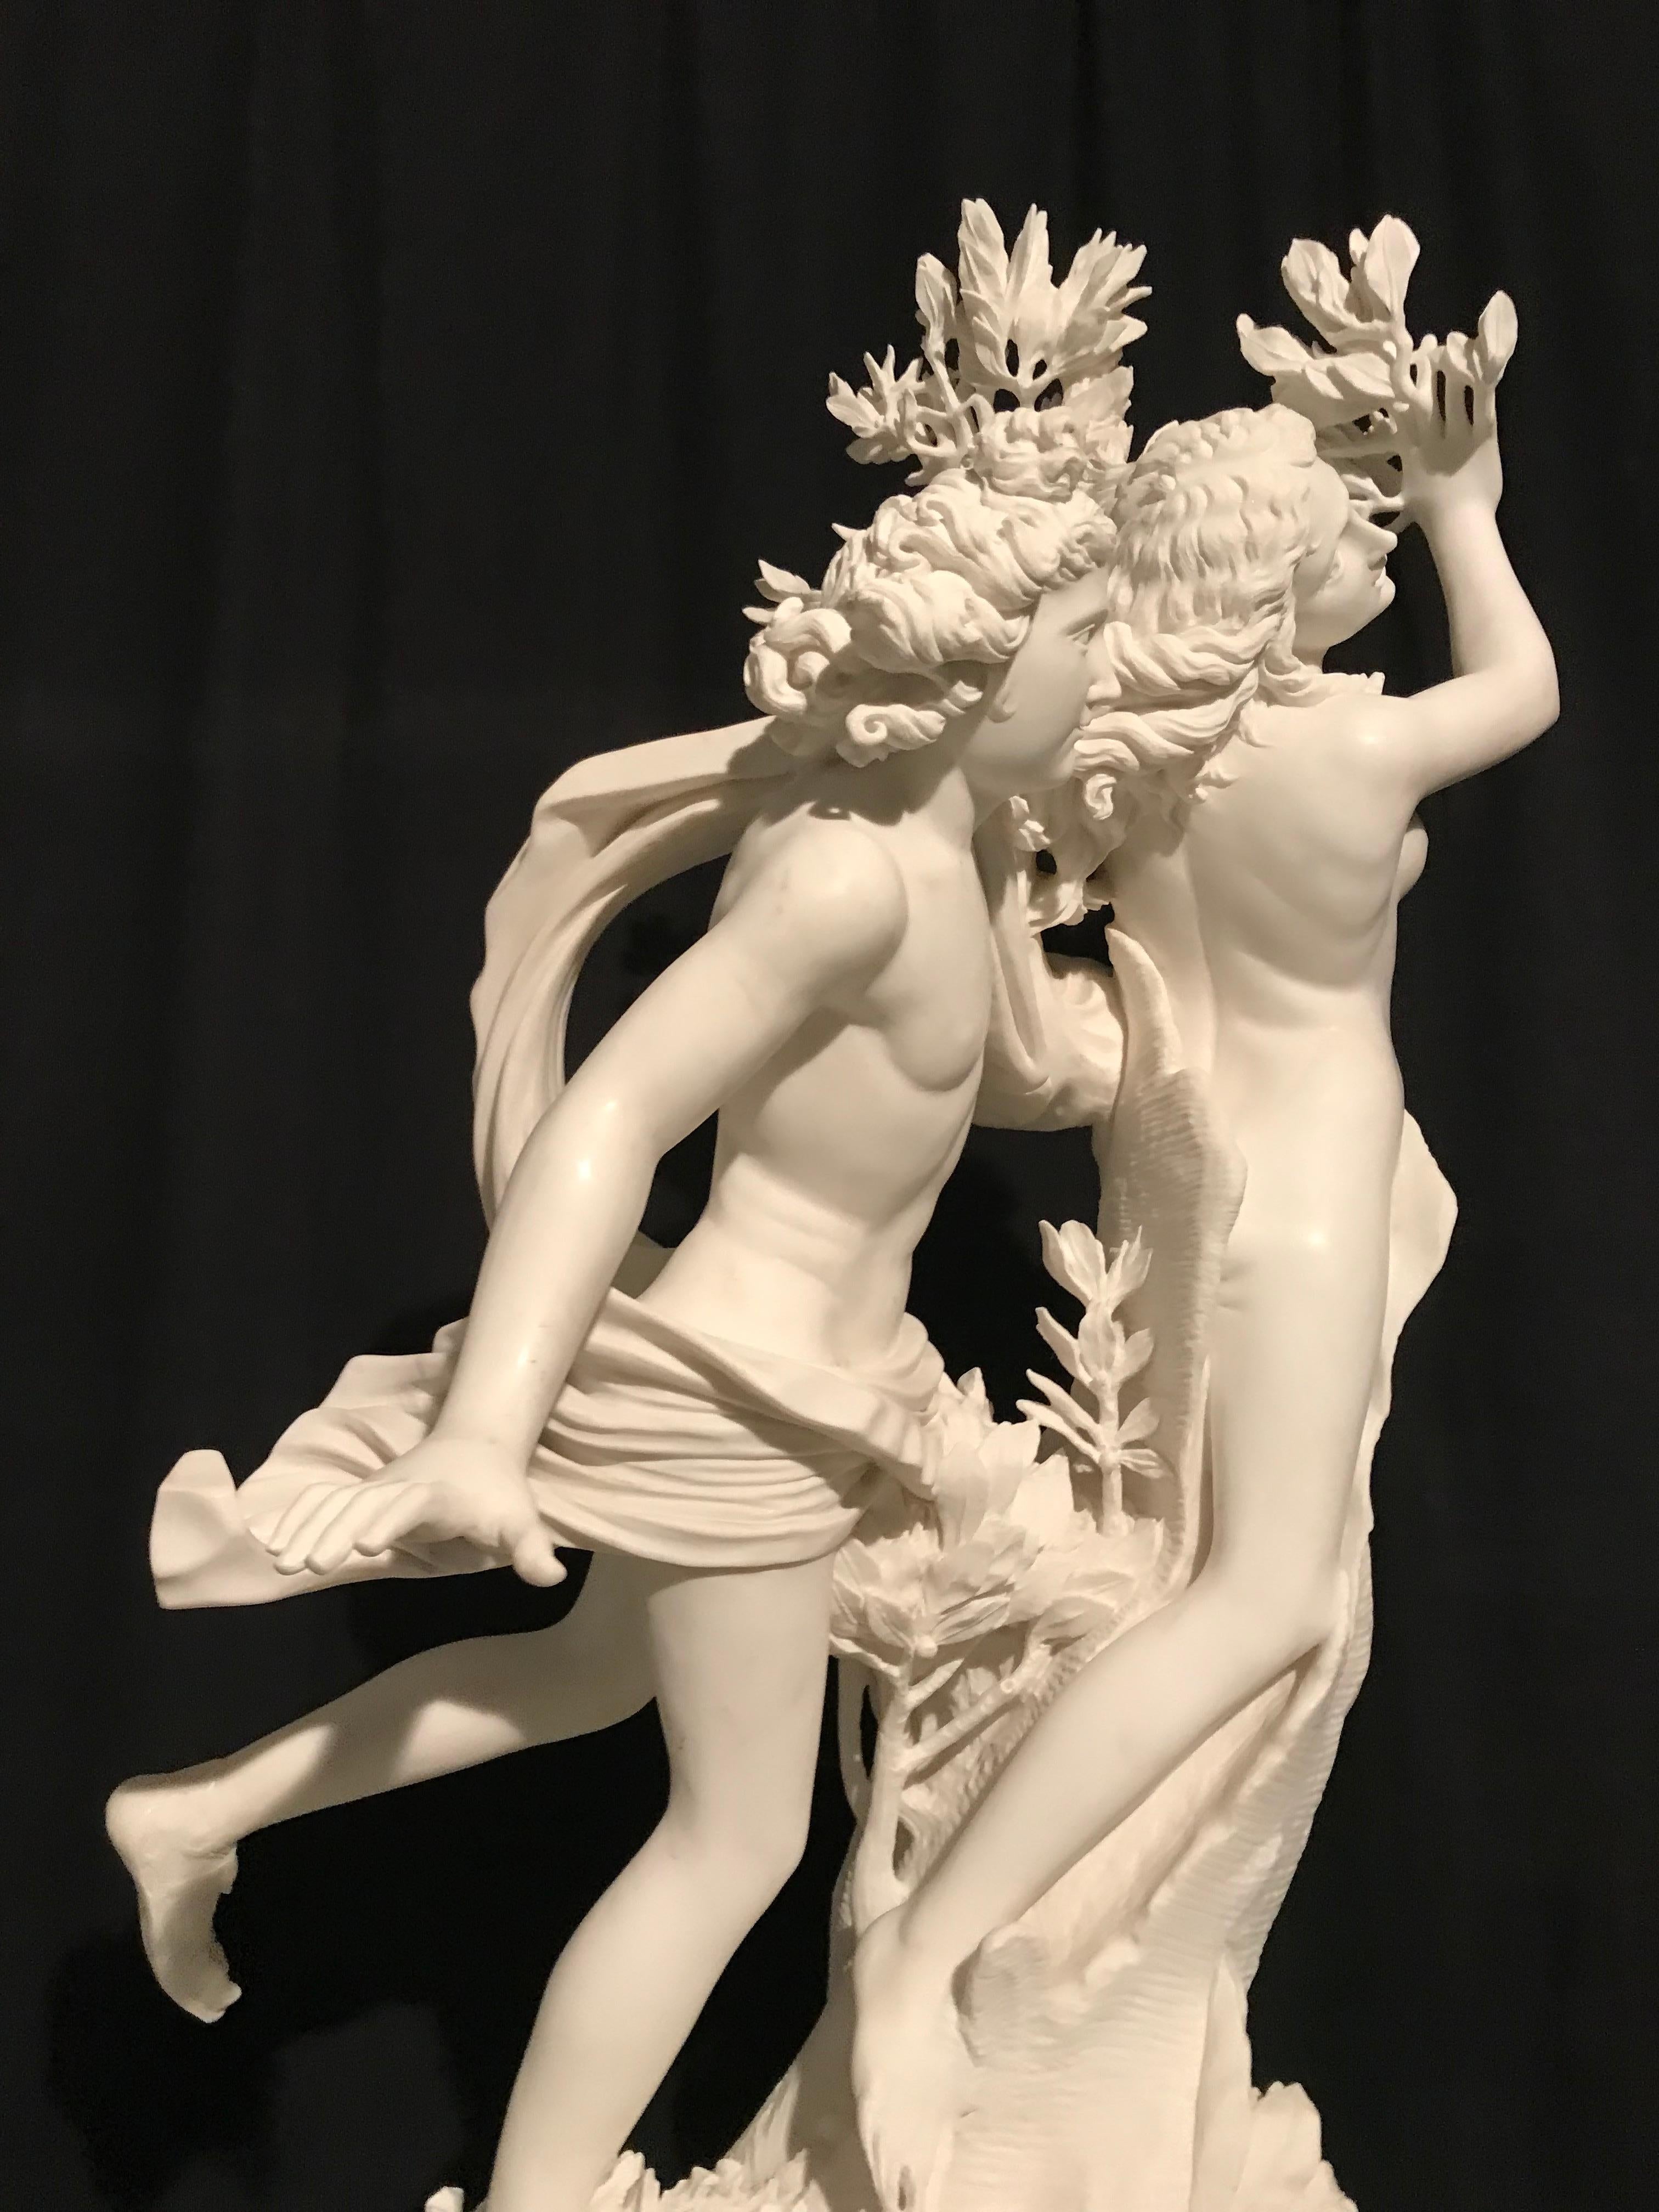 This group of sculpture, made as be spoke by our artists, is a re-edition from the famous and fantastic Sculpture made by one of the most important Italian sculptor, the great Gian Lorenzo Bernini. It is a made by order, ready in around 25 weeks. It